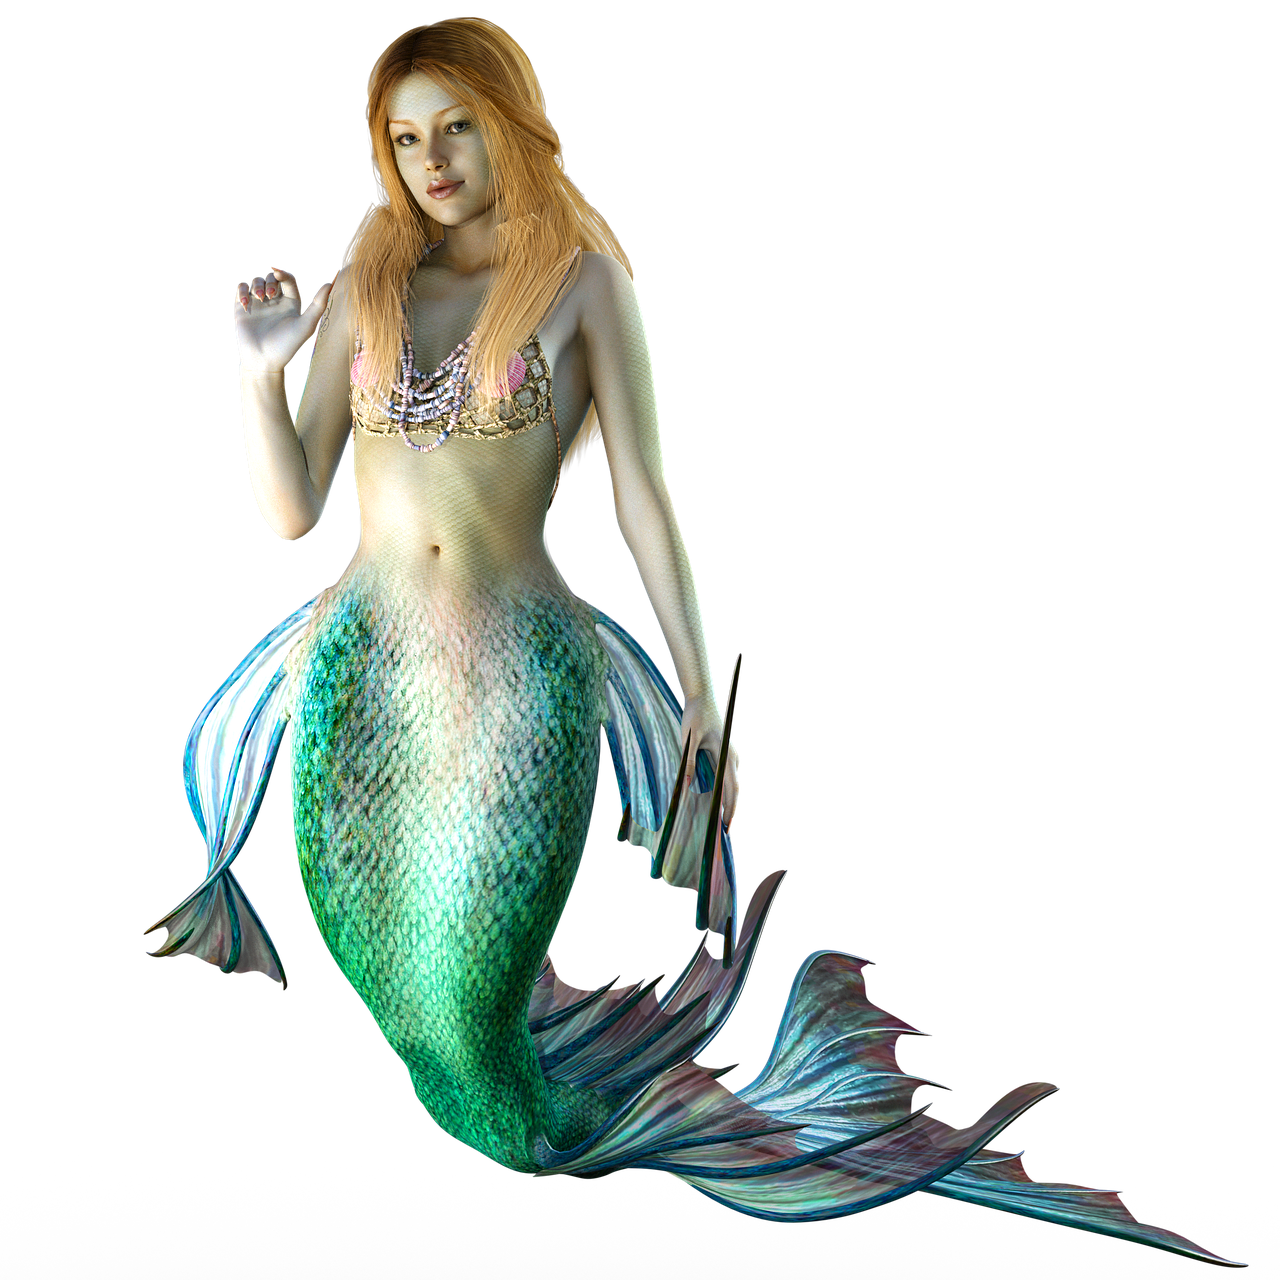 a woman in a bikini sitting on top of a mermaid tail, a raytraced image, fantasy art, with red hair and green eyes, in front of a black background, dressed in long fluent skirt, 3 d render of a full female body